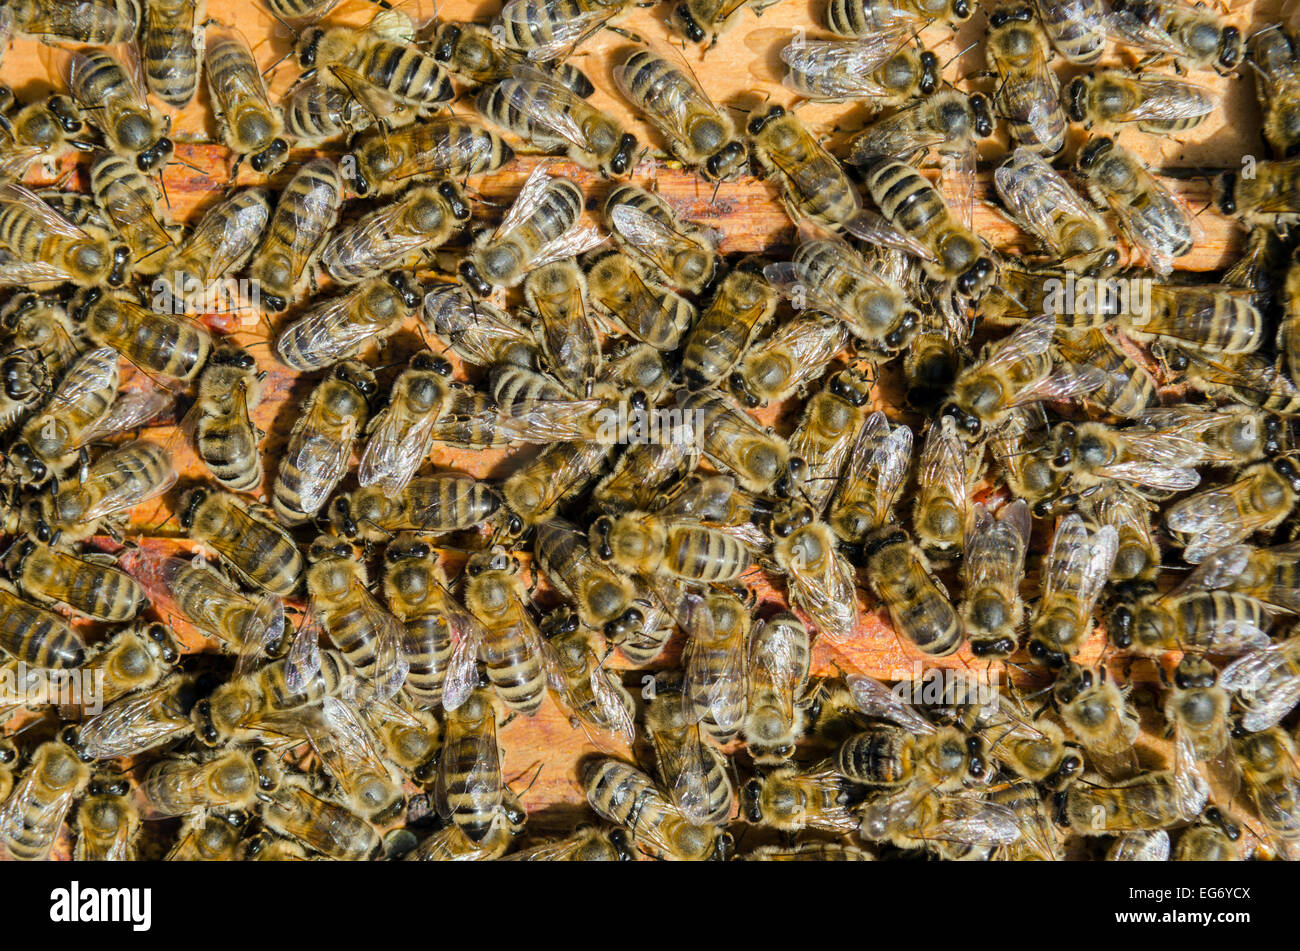 A swarm of bees seen from the above Stock Photo